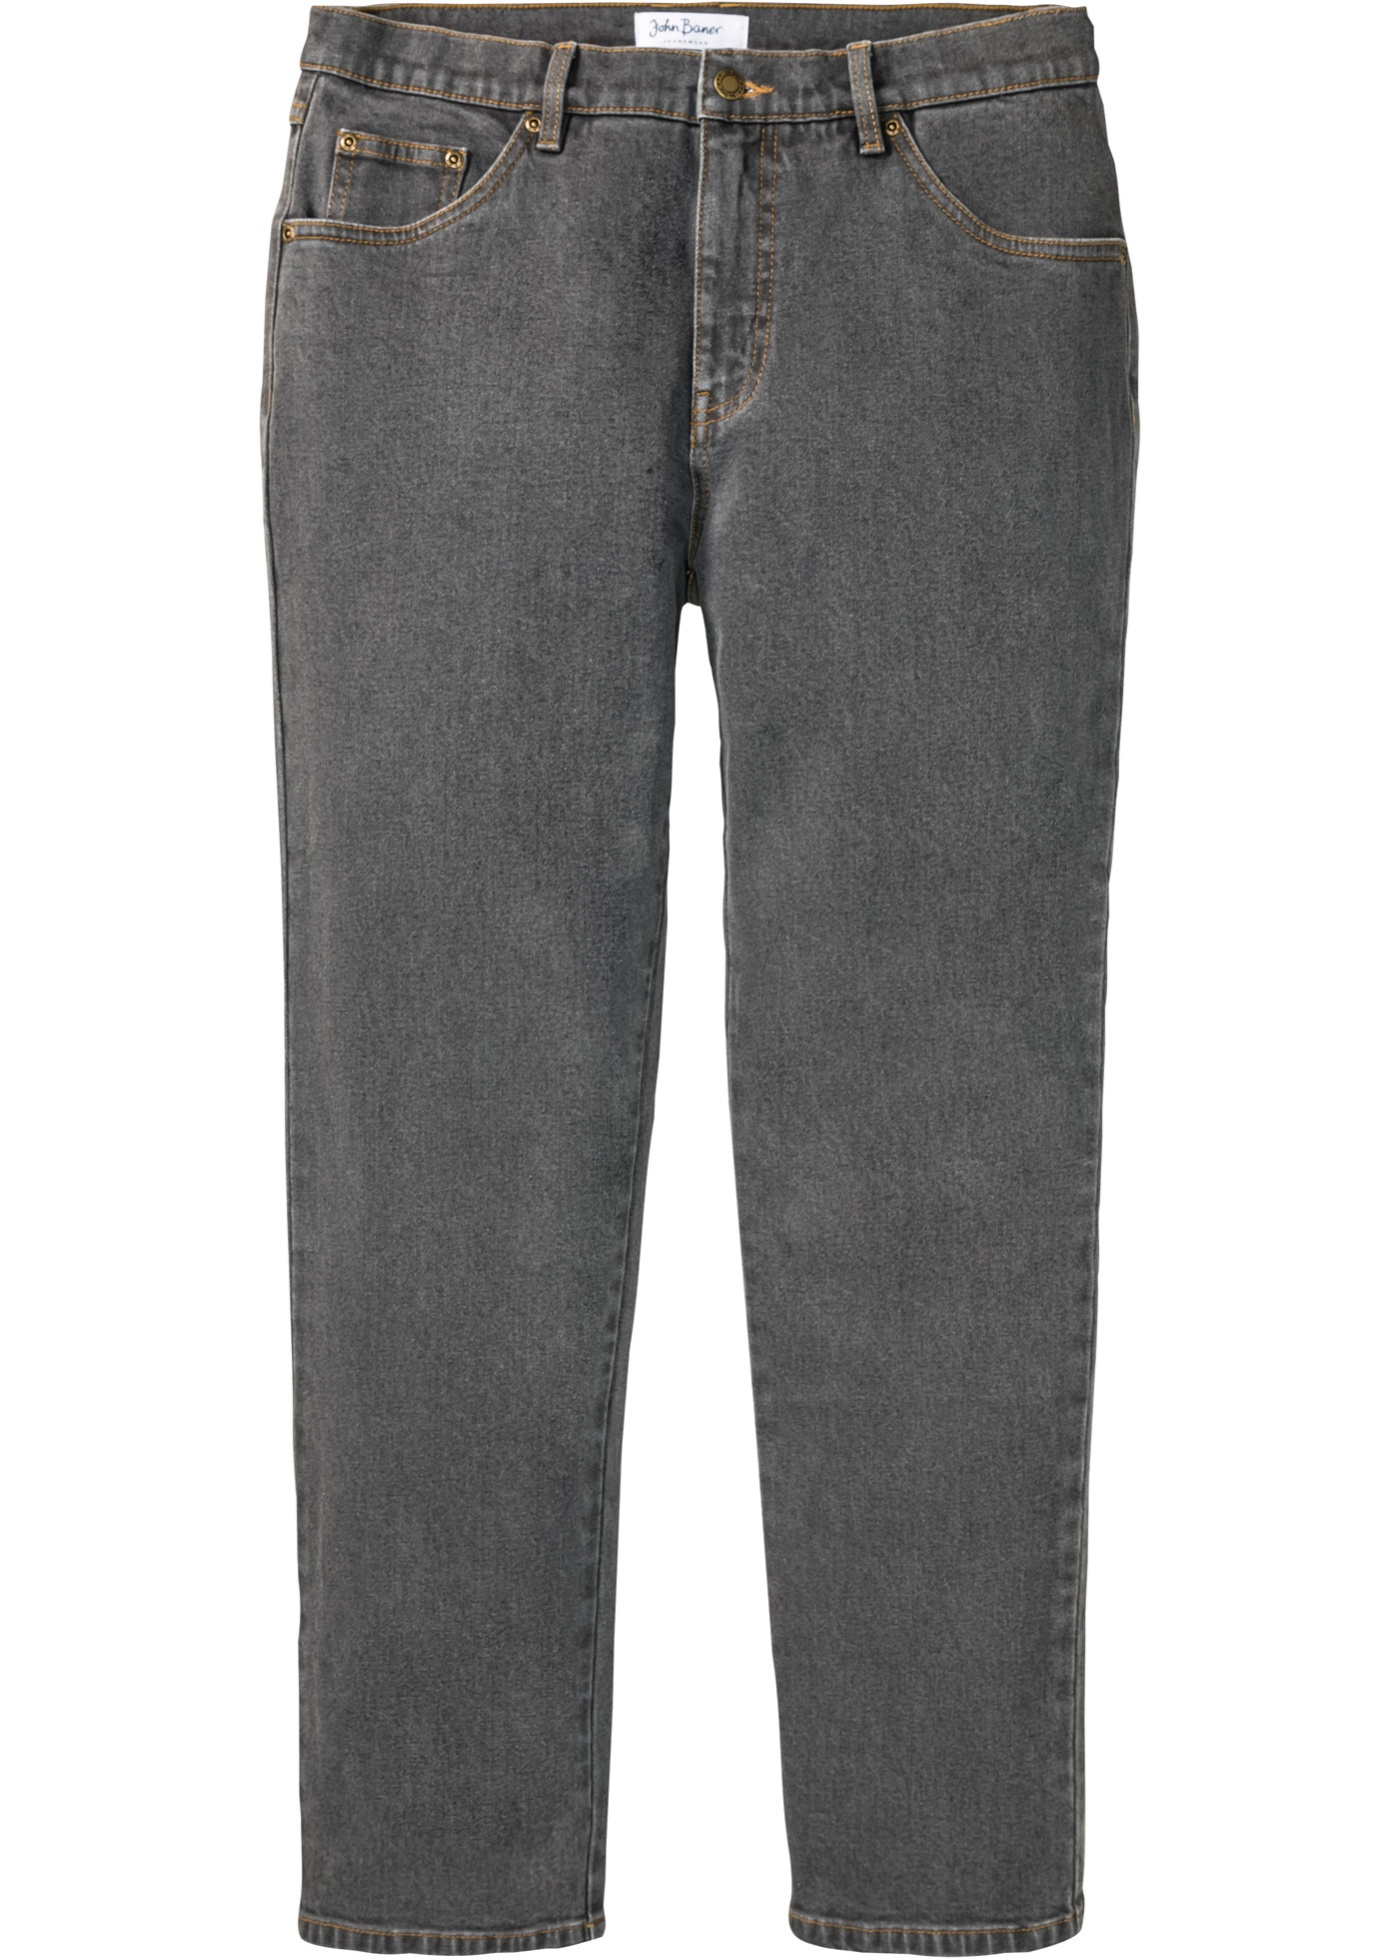 Classic fit stretch jeans, straight